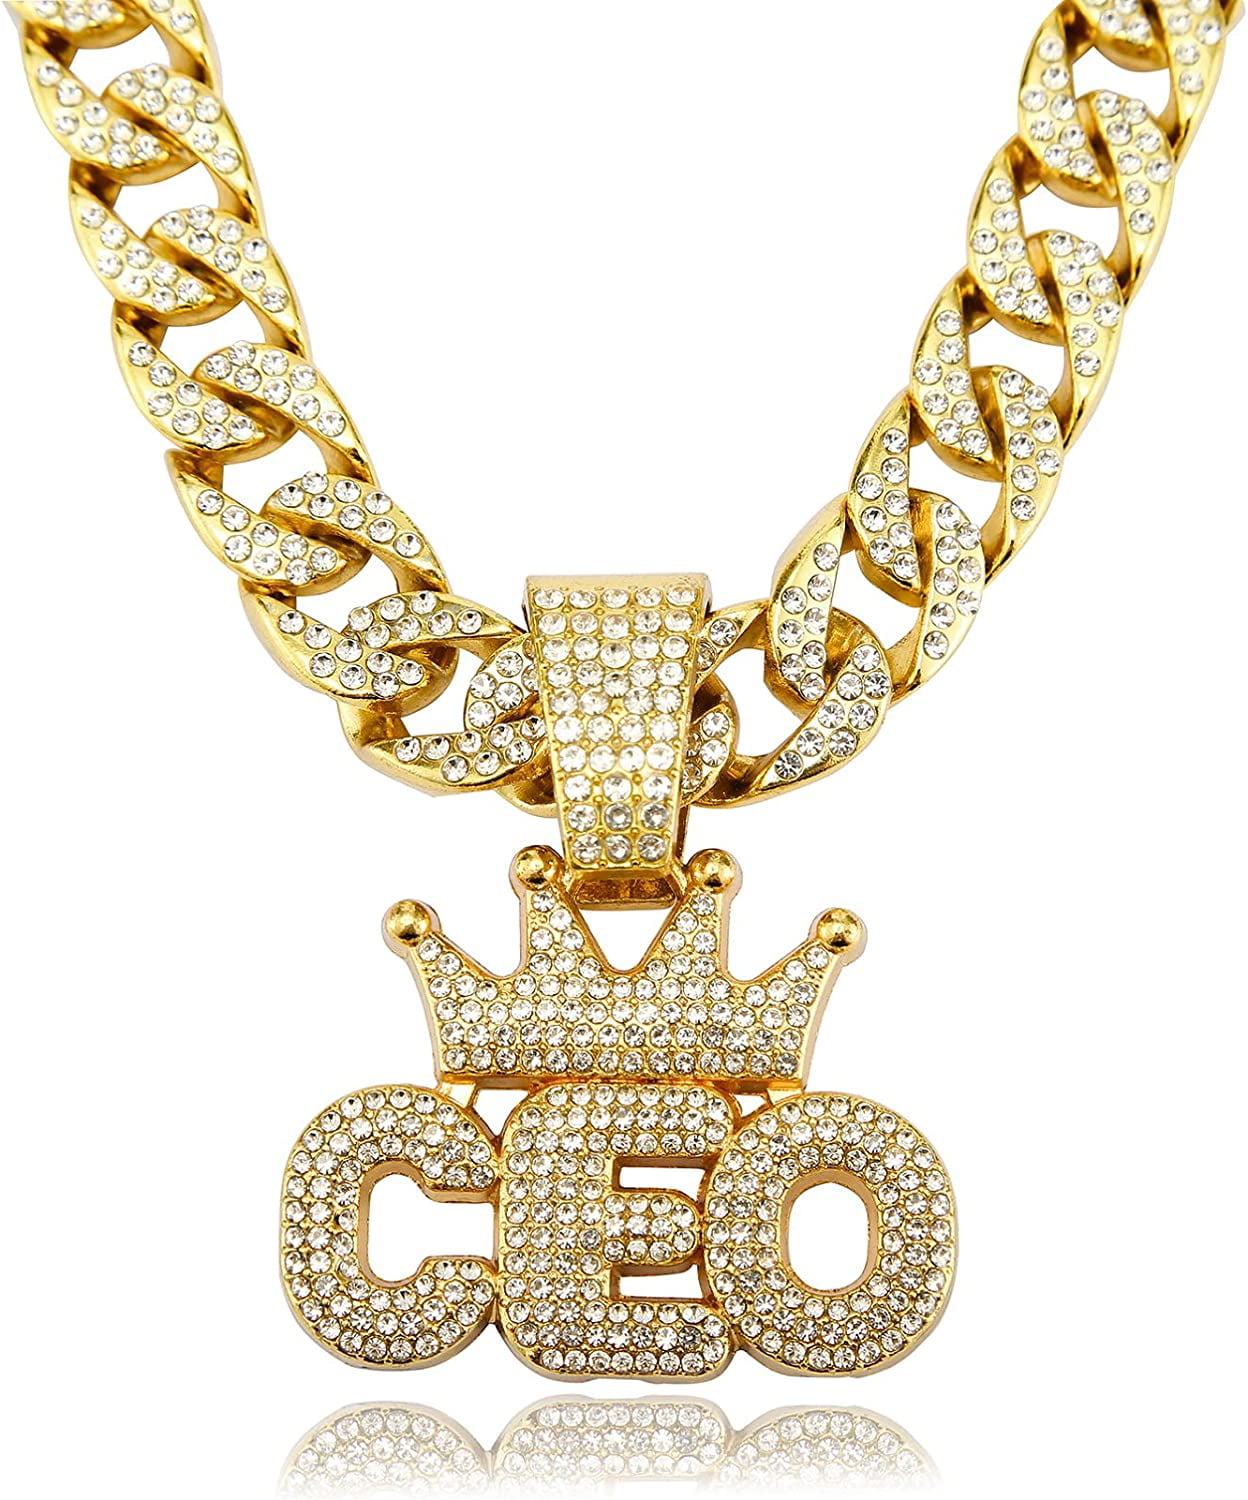 HH Bling Empire Mens Gold Silver Cuban Link Chain Necklace Bracelet Earring Sets Iced Out Hip Hop Jewelry for Men and Boys